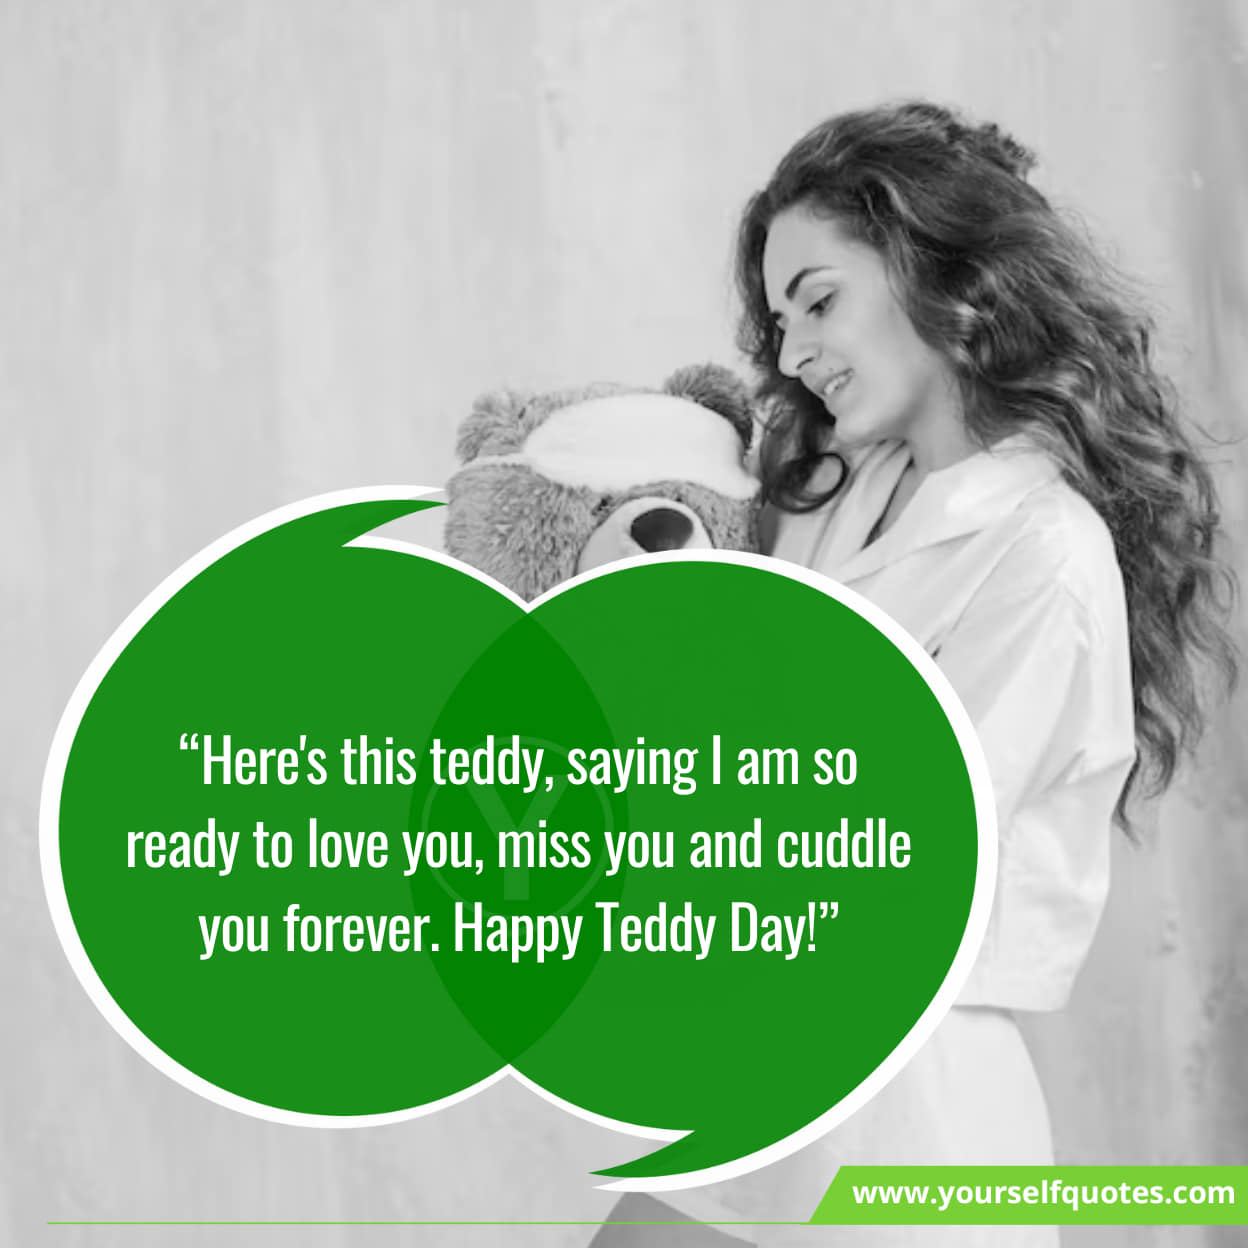 Teddy Day wishes for your loved one